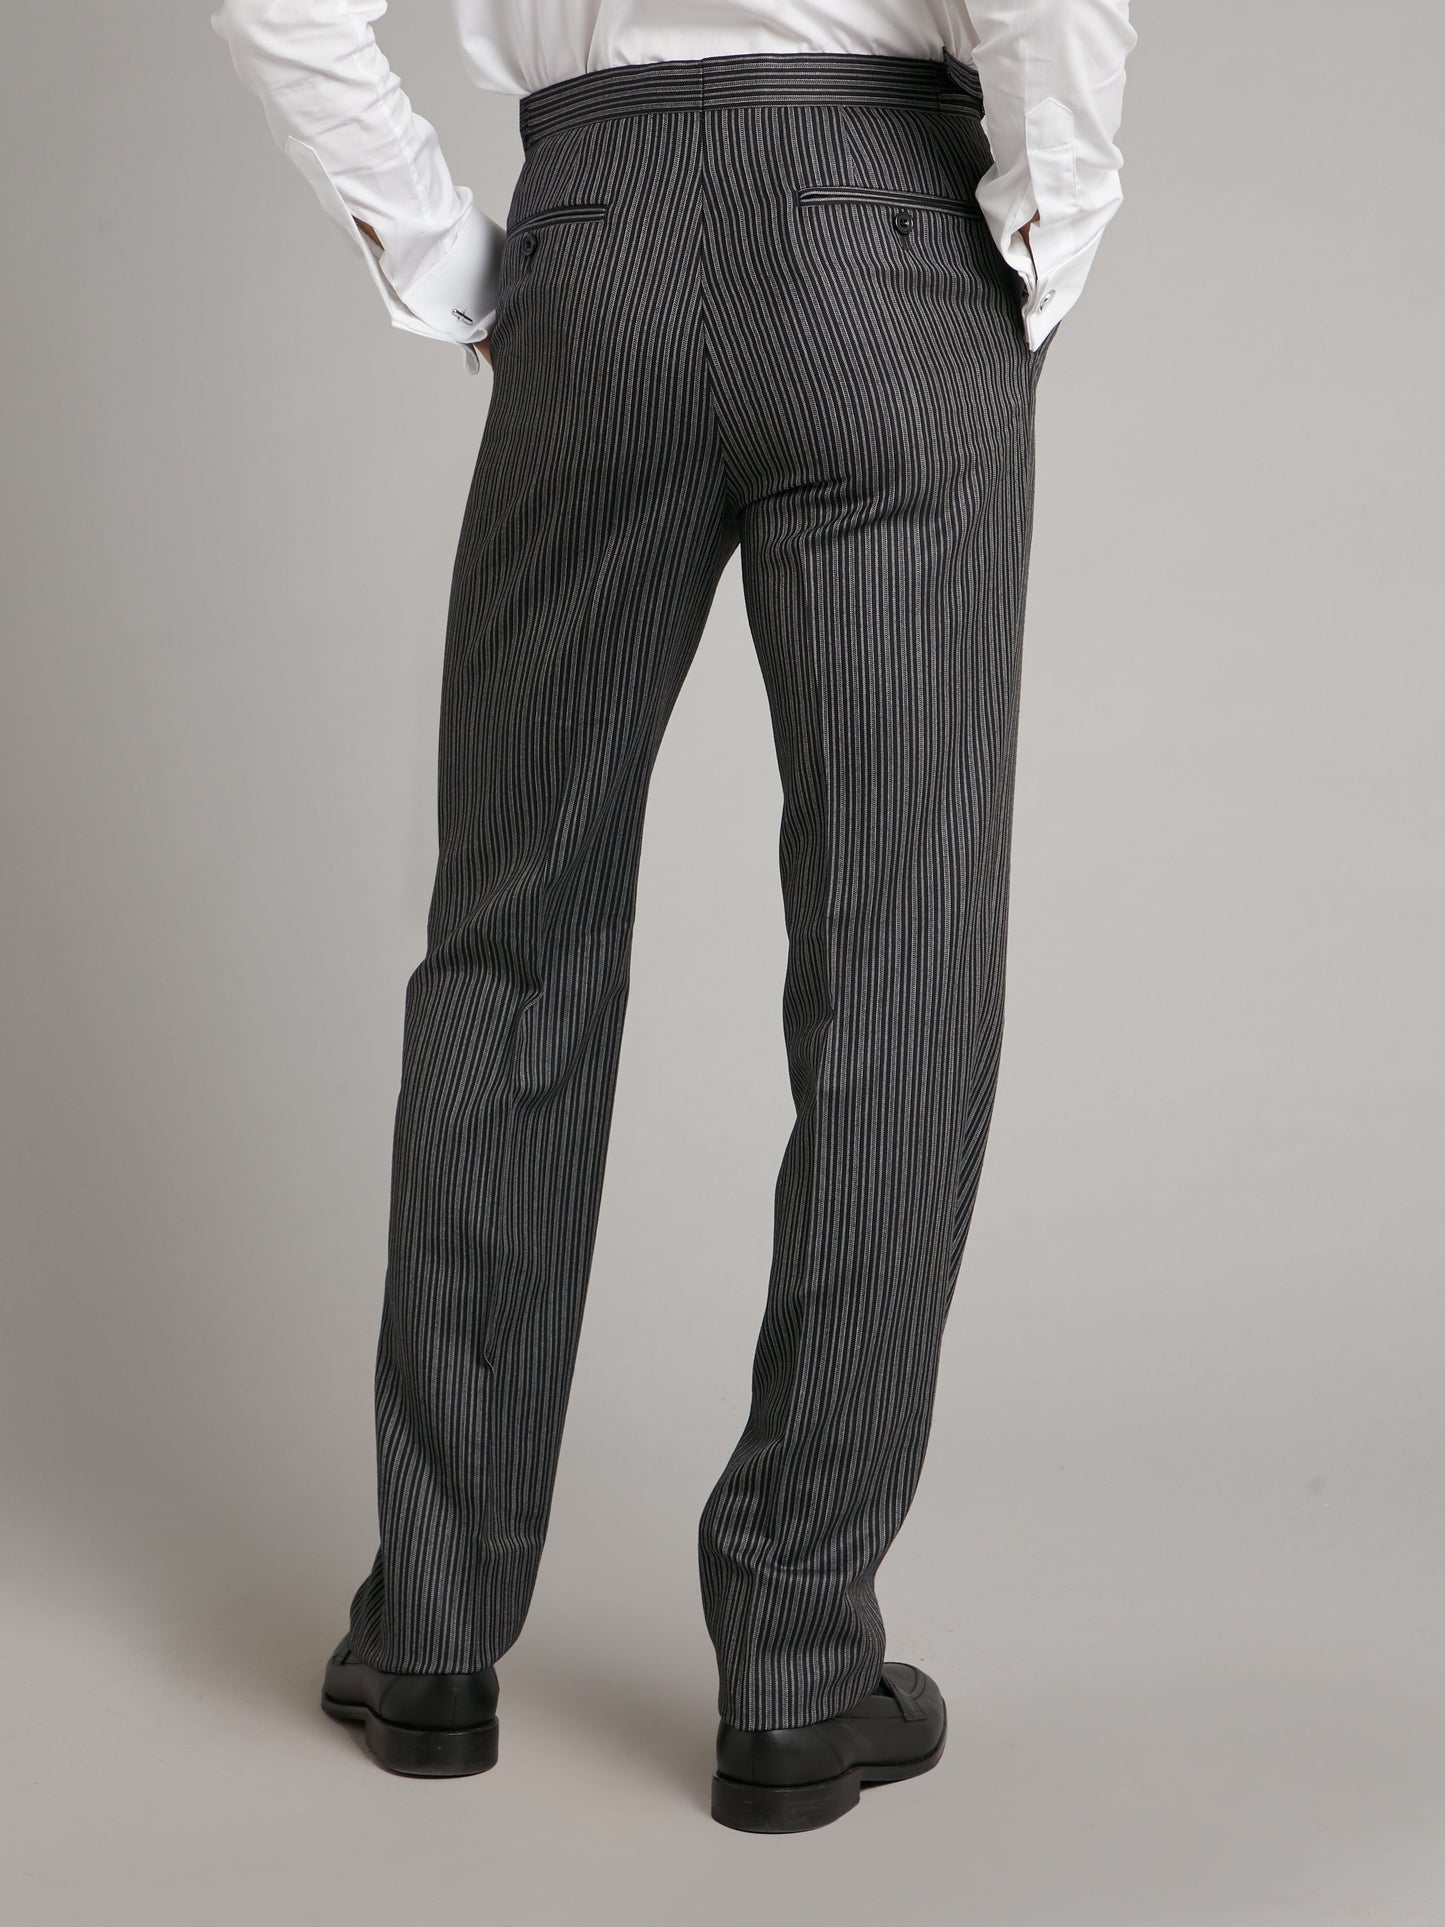 pleated luxury morning trousers black grey 3